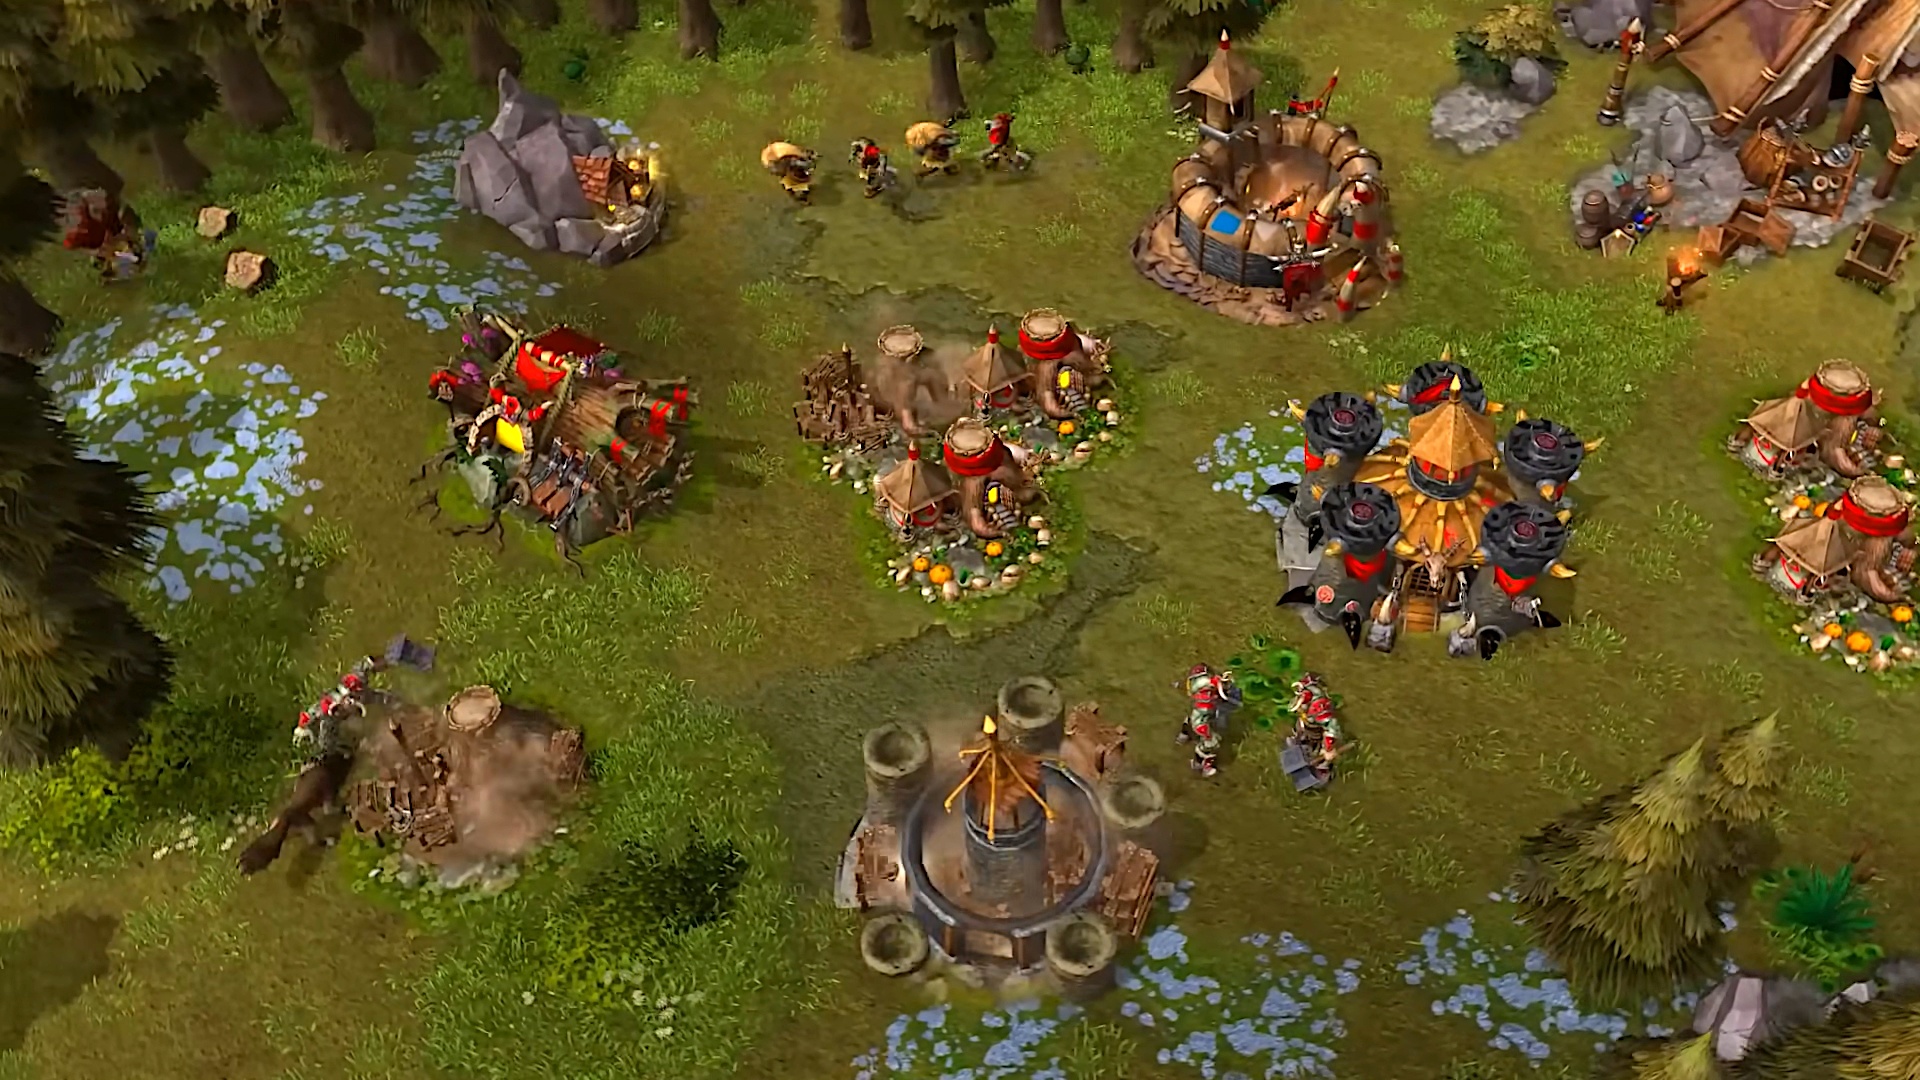 (Finally, classic strategy gameplay in the Warcraft universe again - the fan remake makes it possible.)